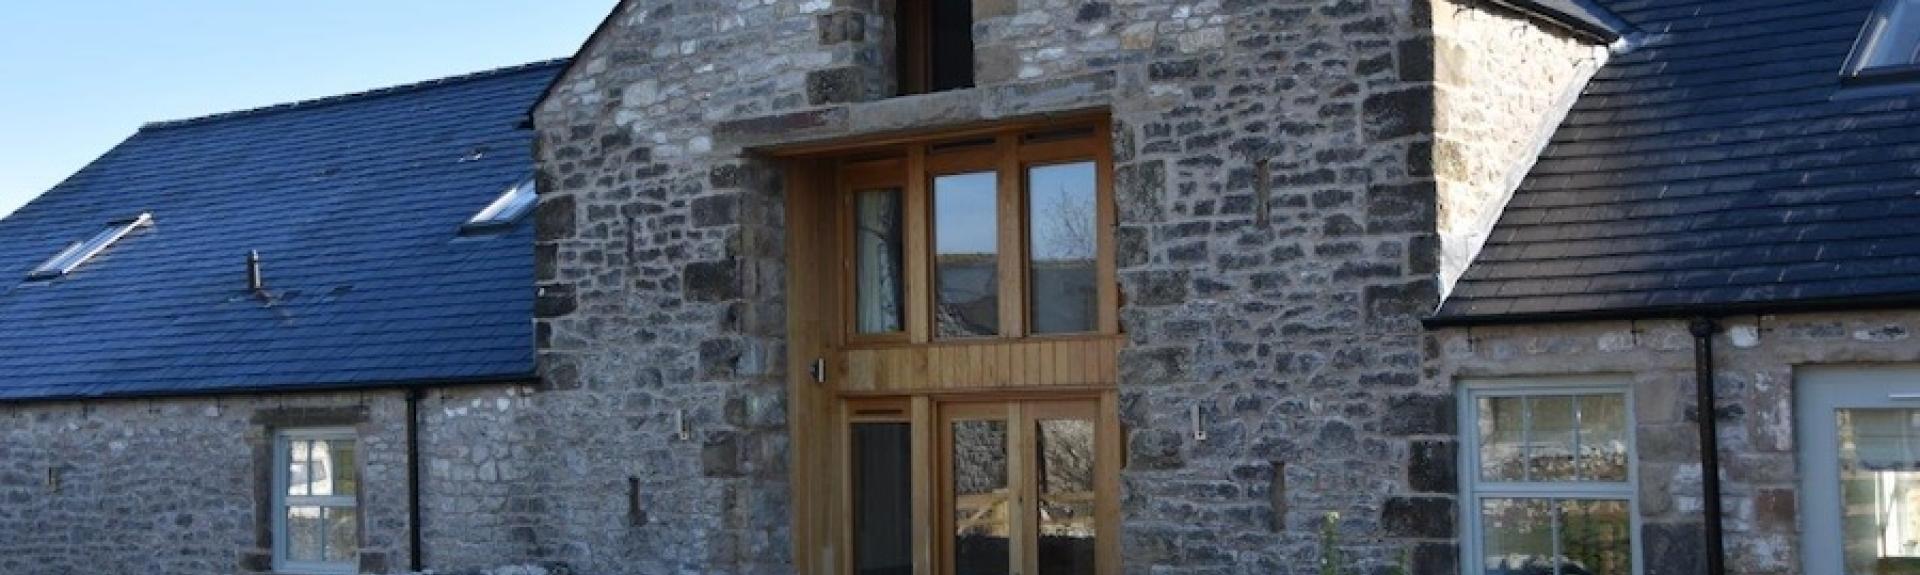 Exterior of a stone-built barn conversion with floor-to-ceiling windows behind a low stone wall.